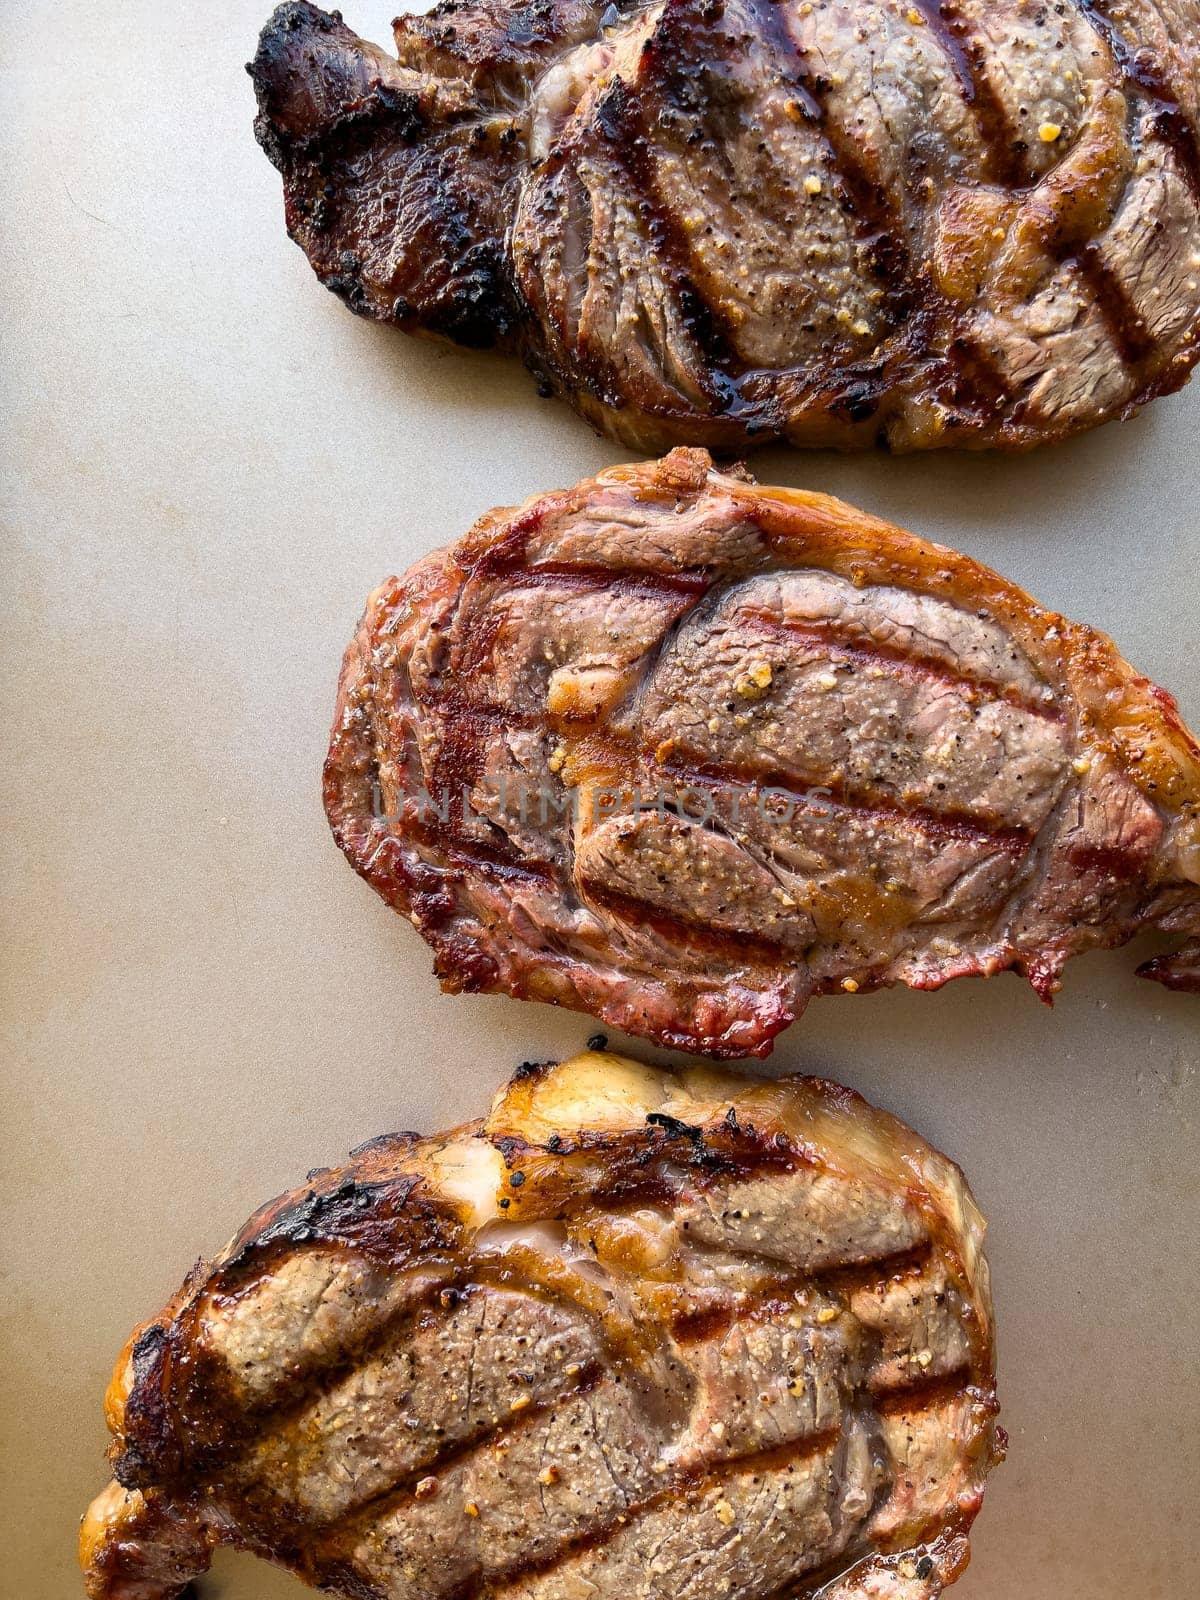 succulent texture of three ribeye steaks grilled to perfection, featuring charred edges and distinct grill marks, showcased on a neutral background.